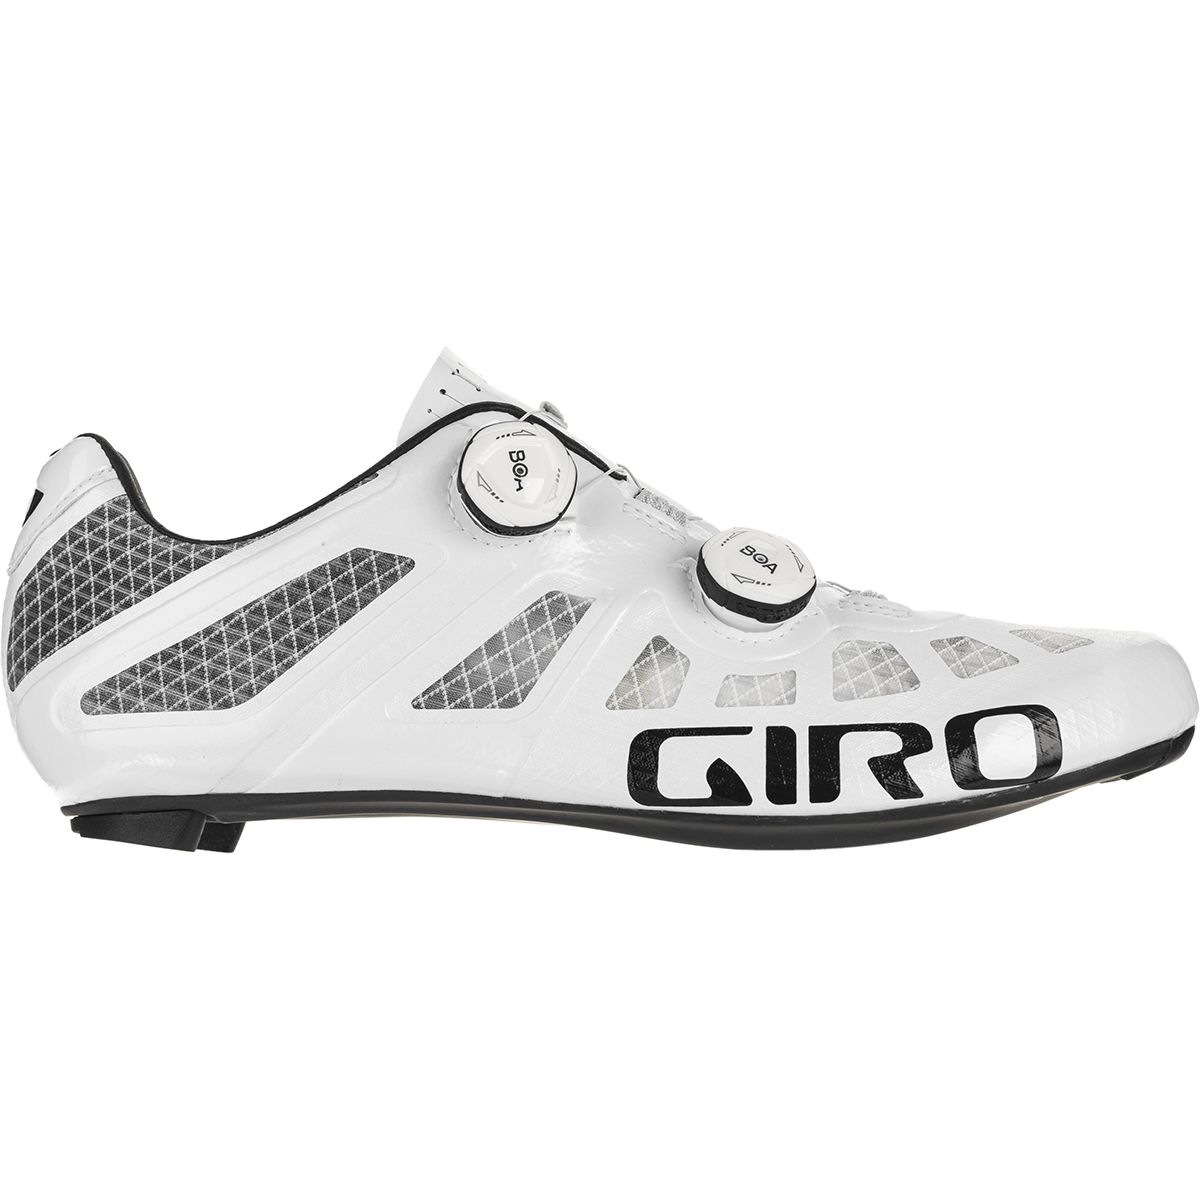 Imperial Cycling Shoe - Men's